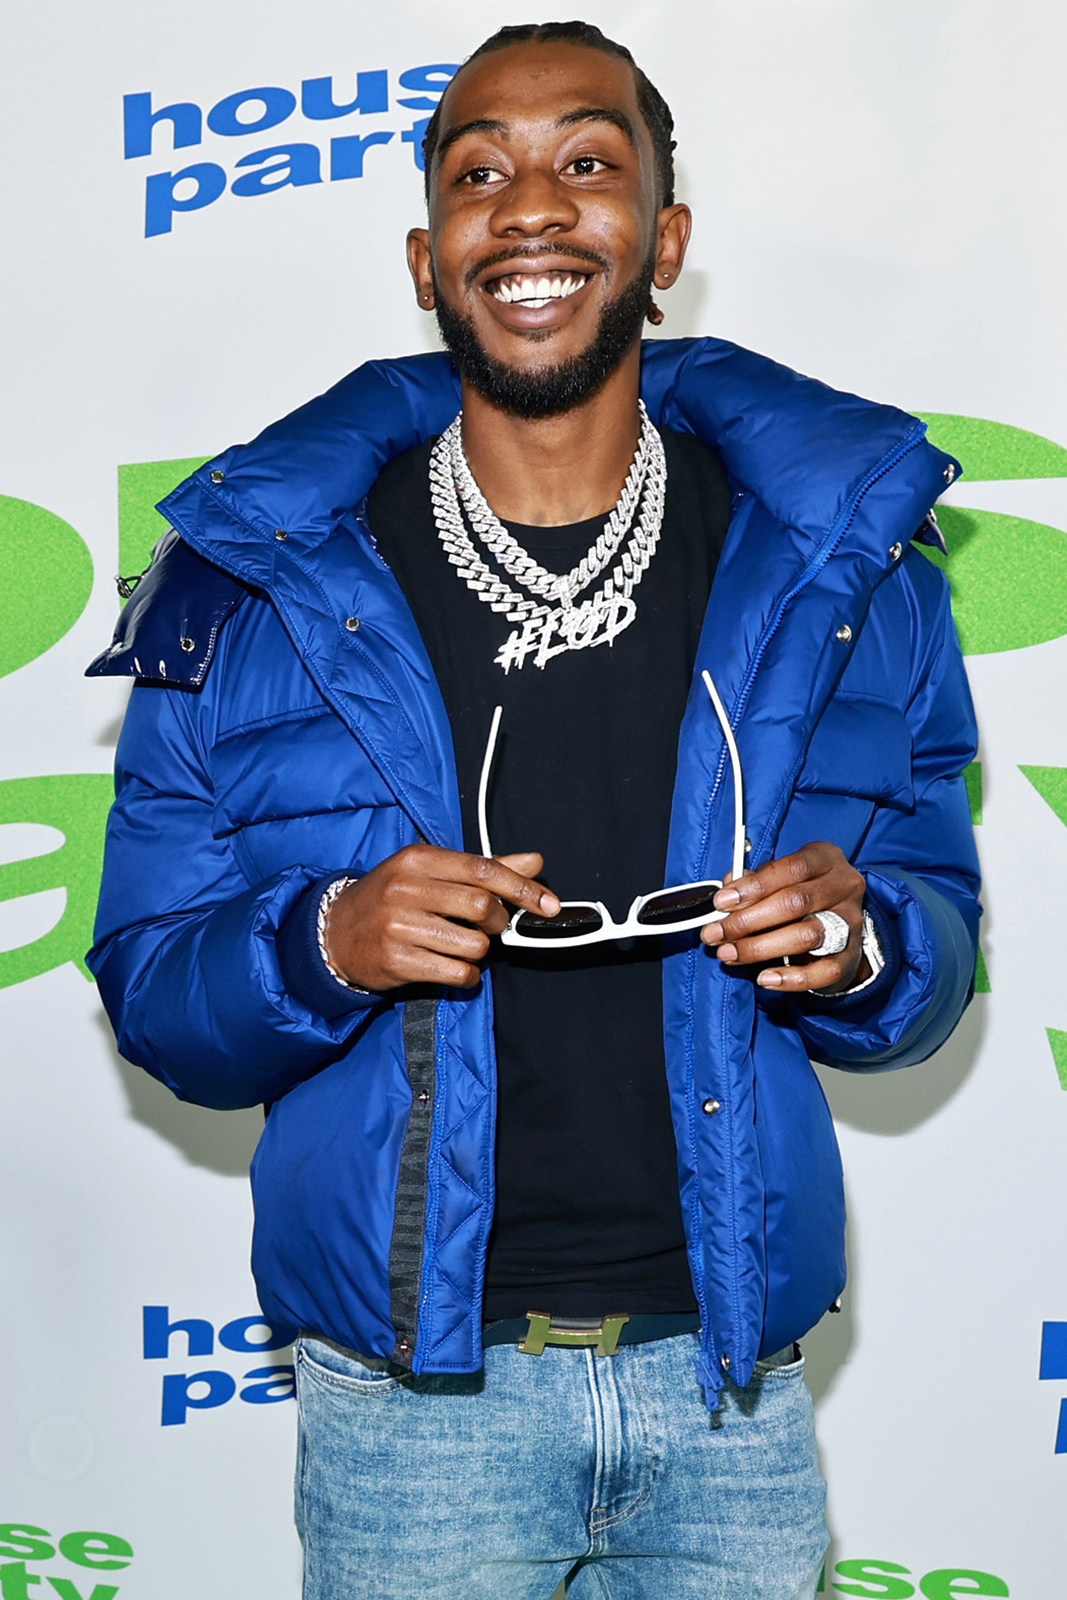 Desiigner, real name Sidney Royel Selby III, pictured at an event in Hollywood in January. The US rapper said he was “ashamed” about what happened on the plane, that he was admitting himself to a facility to get help and was cancelling all his shows. Photo: Getty Images/TNS